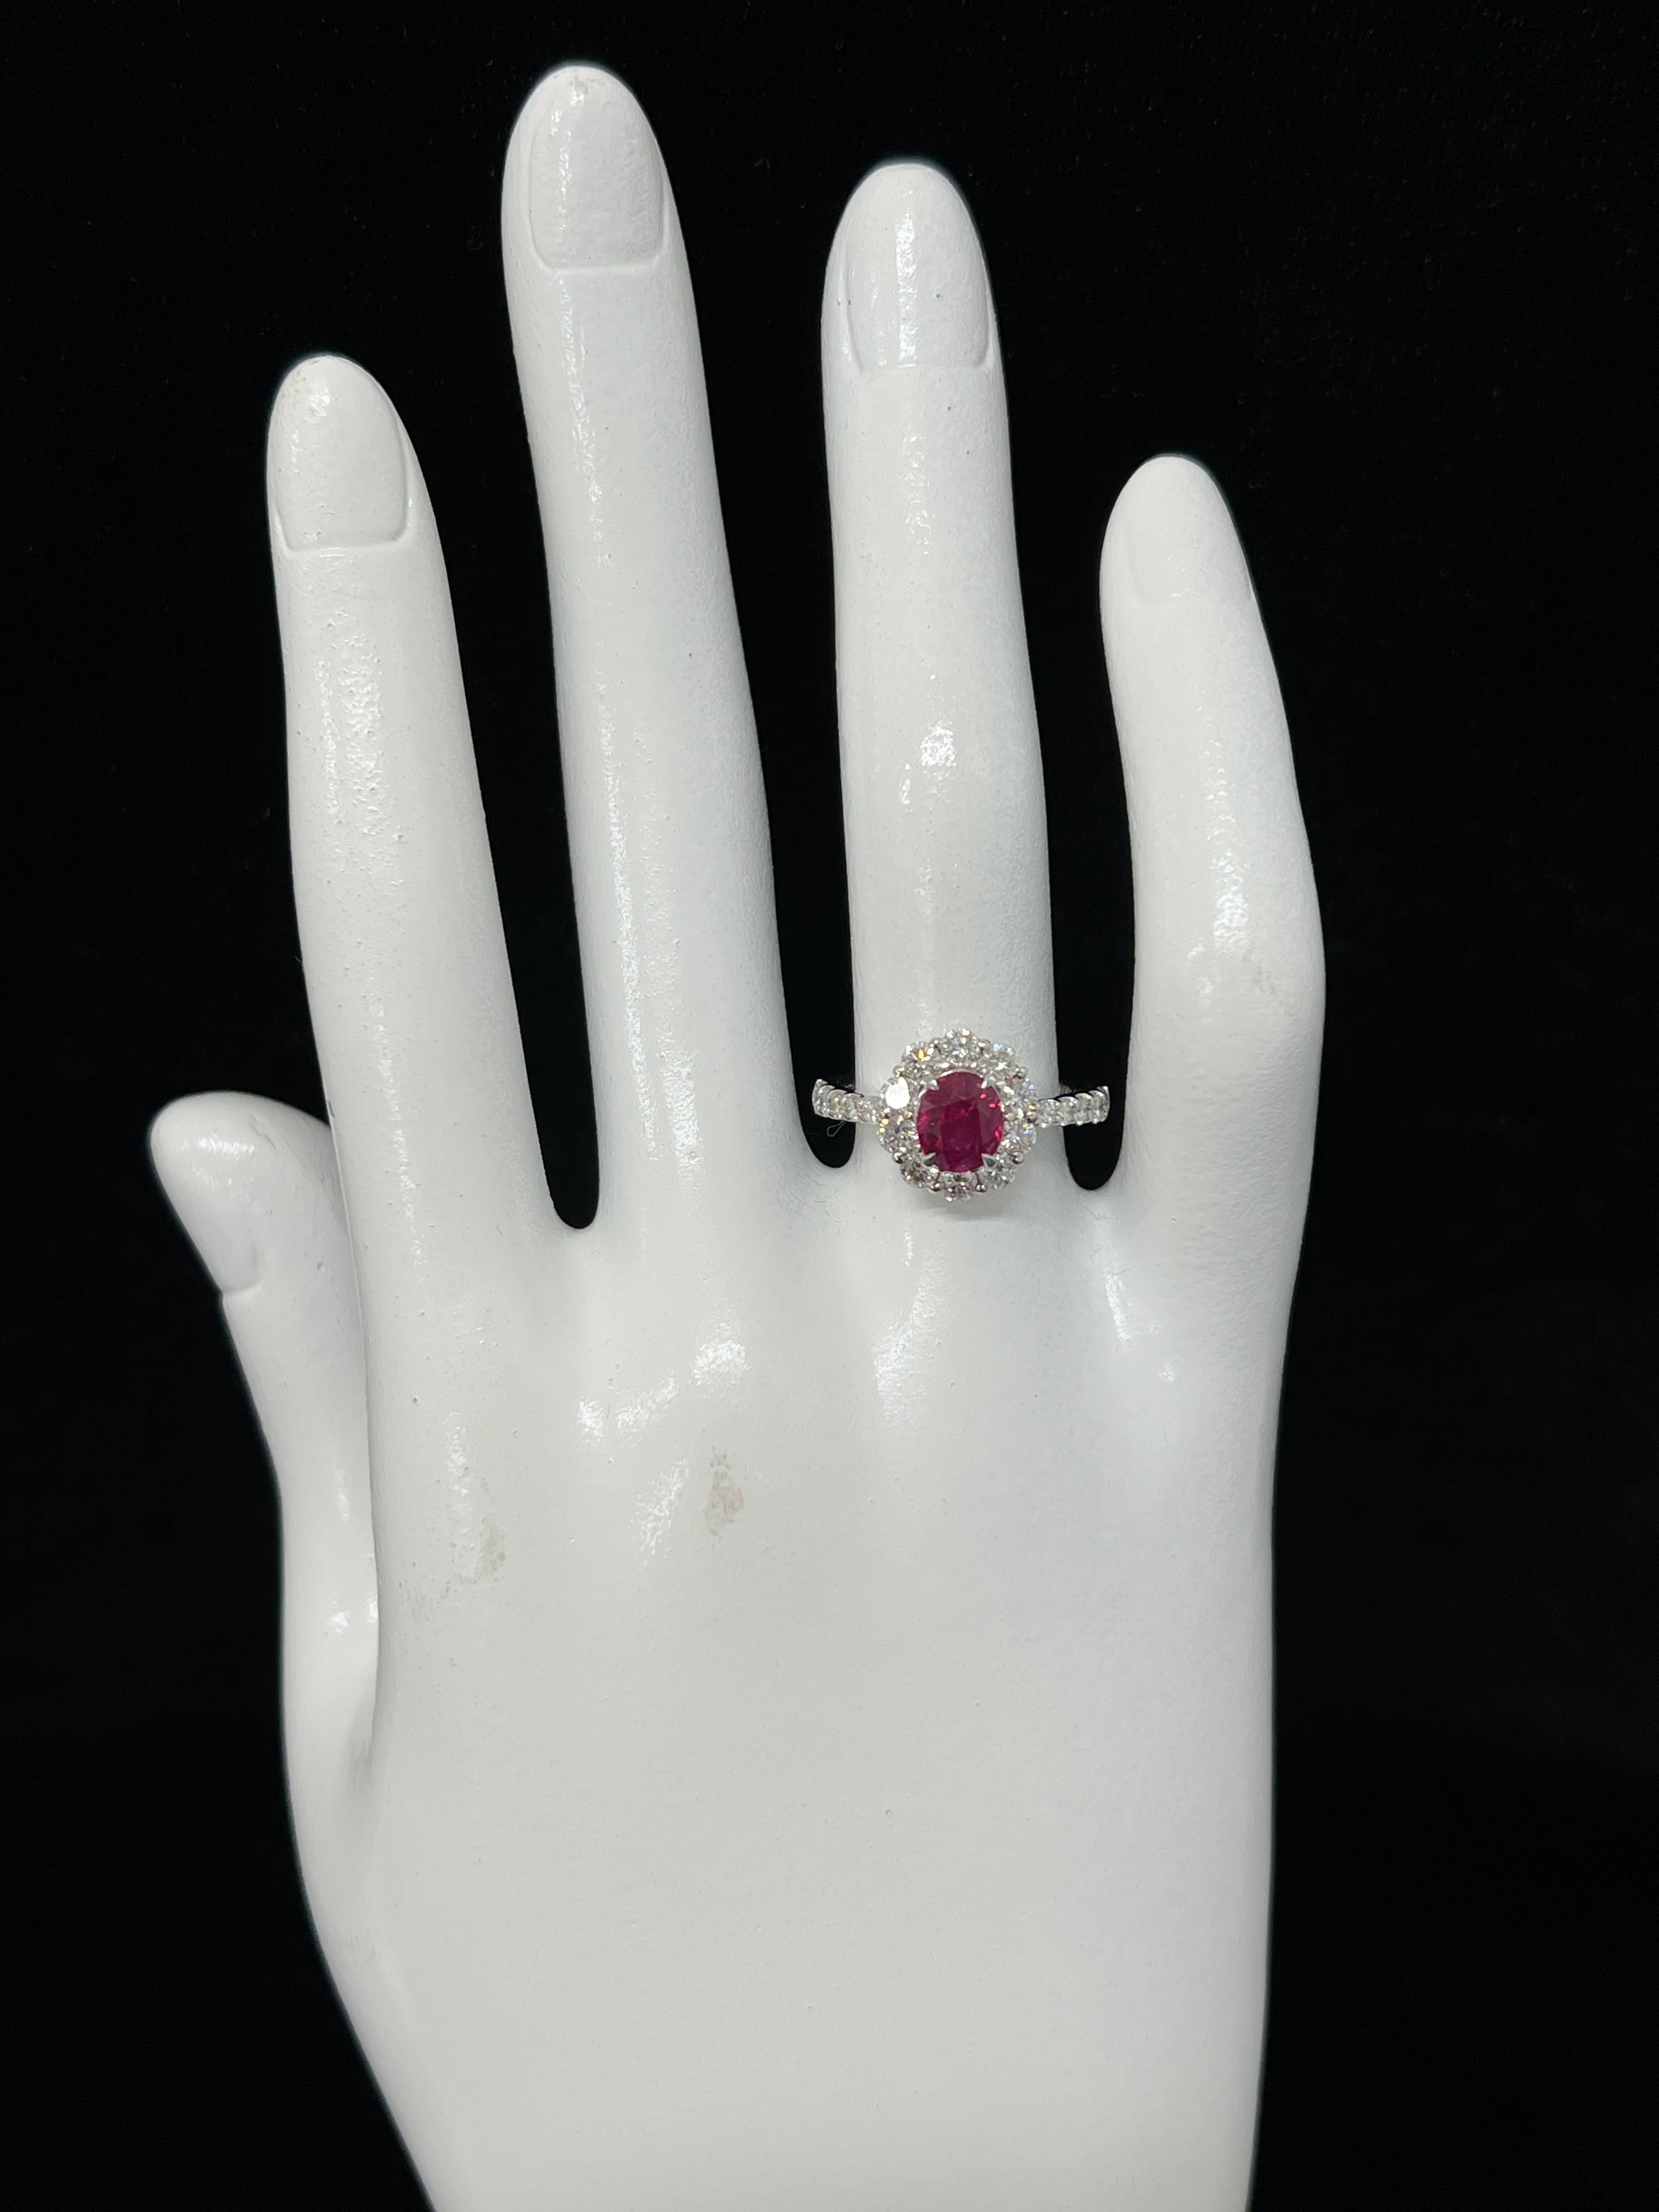 GIA Certified 1.54 Carat Untreated (No Heat) Ruby & Diamond Ring Set in Platinum For Sale 1